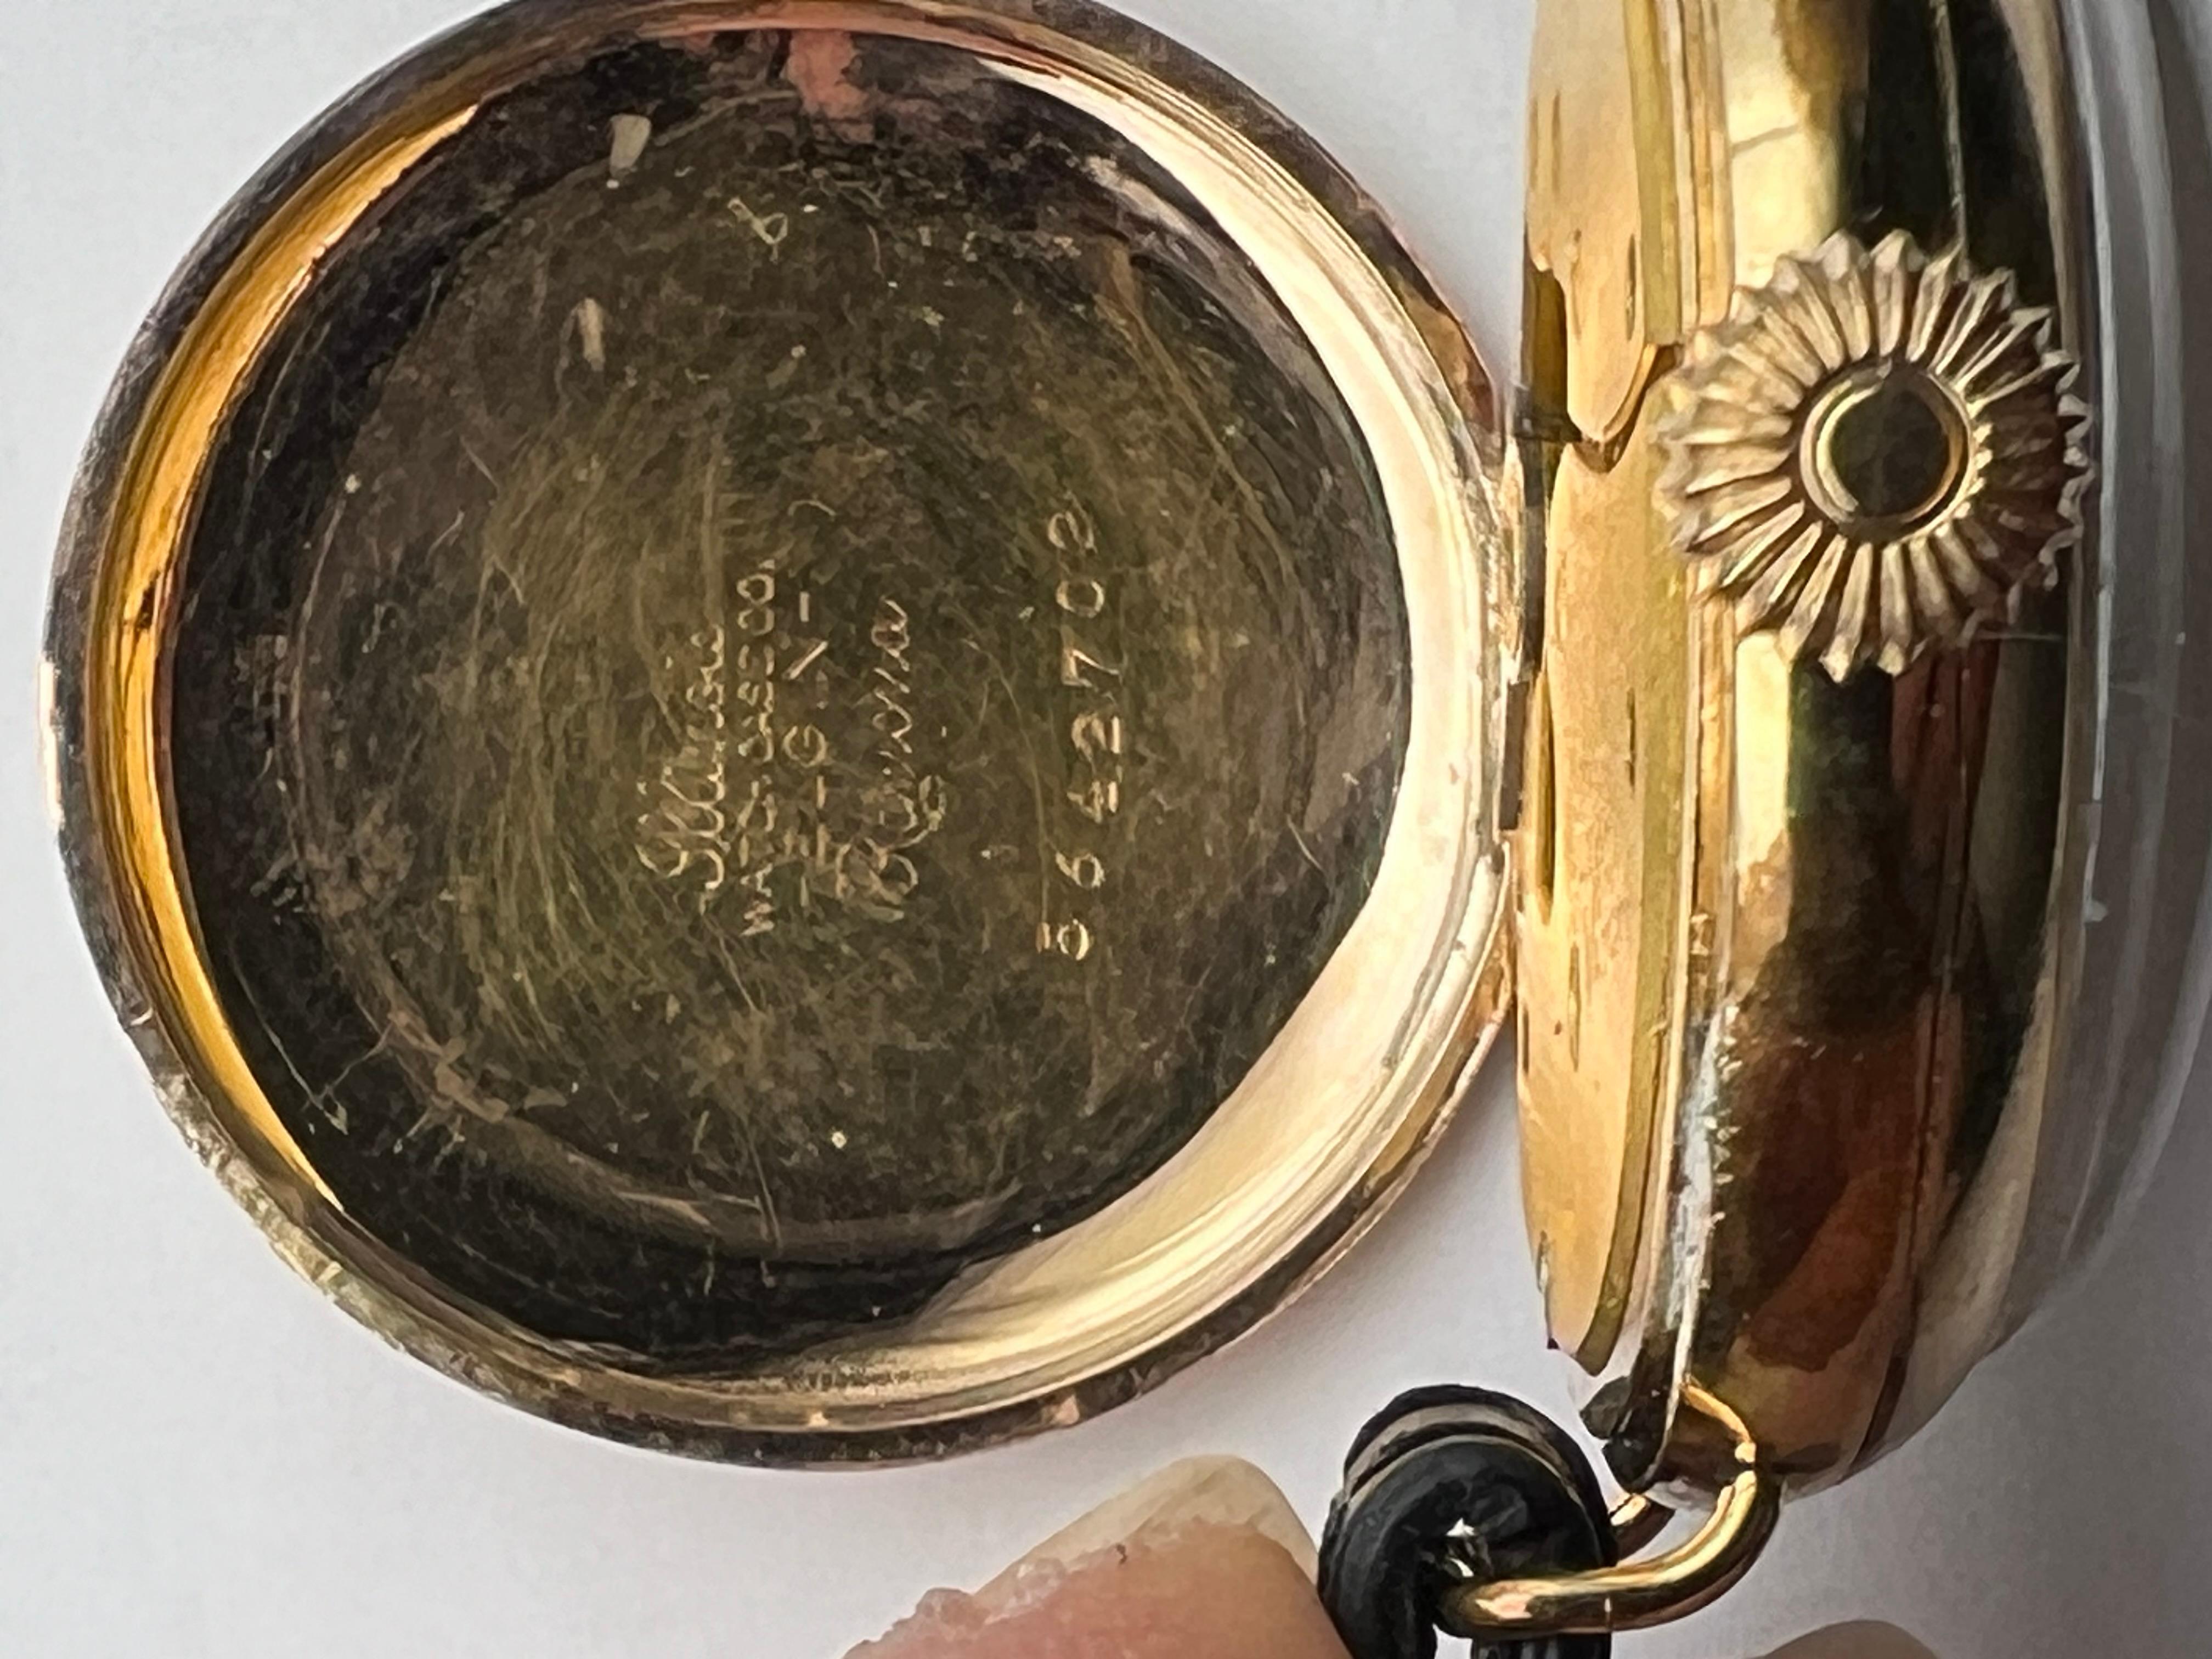 1898, Waltham 7 Jewel, Sublime Fancy Dial, Yellow Gold Filled For Sale 7